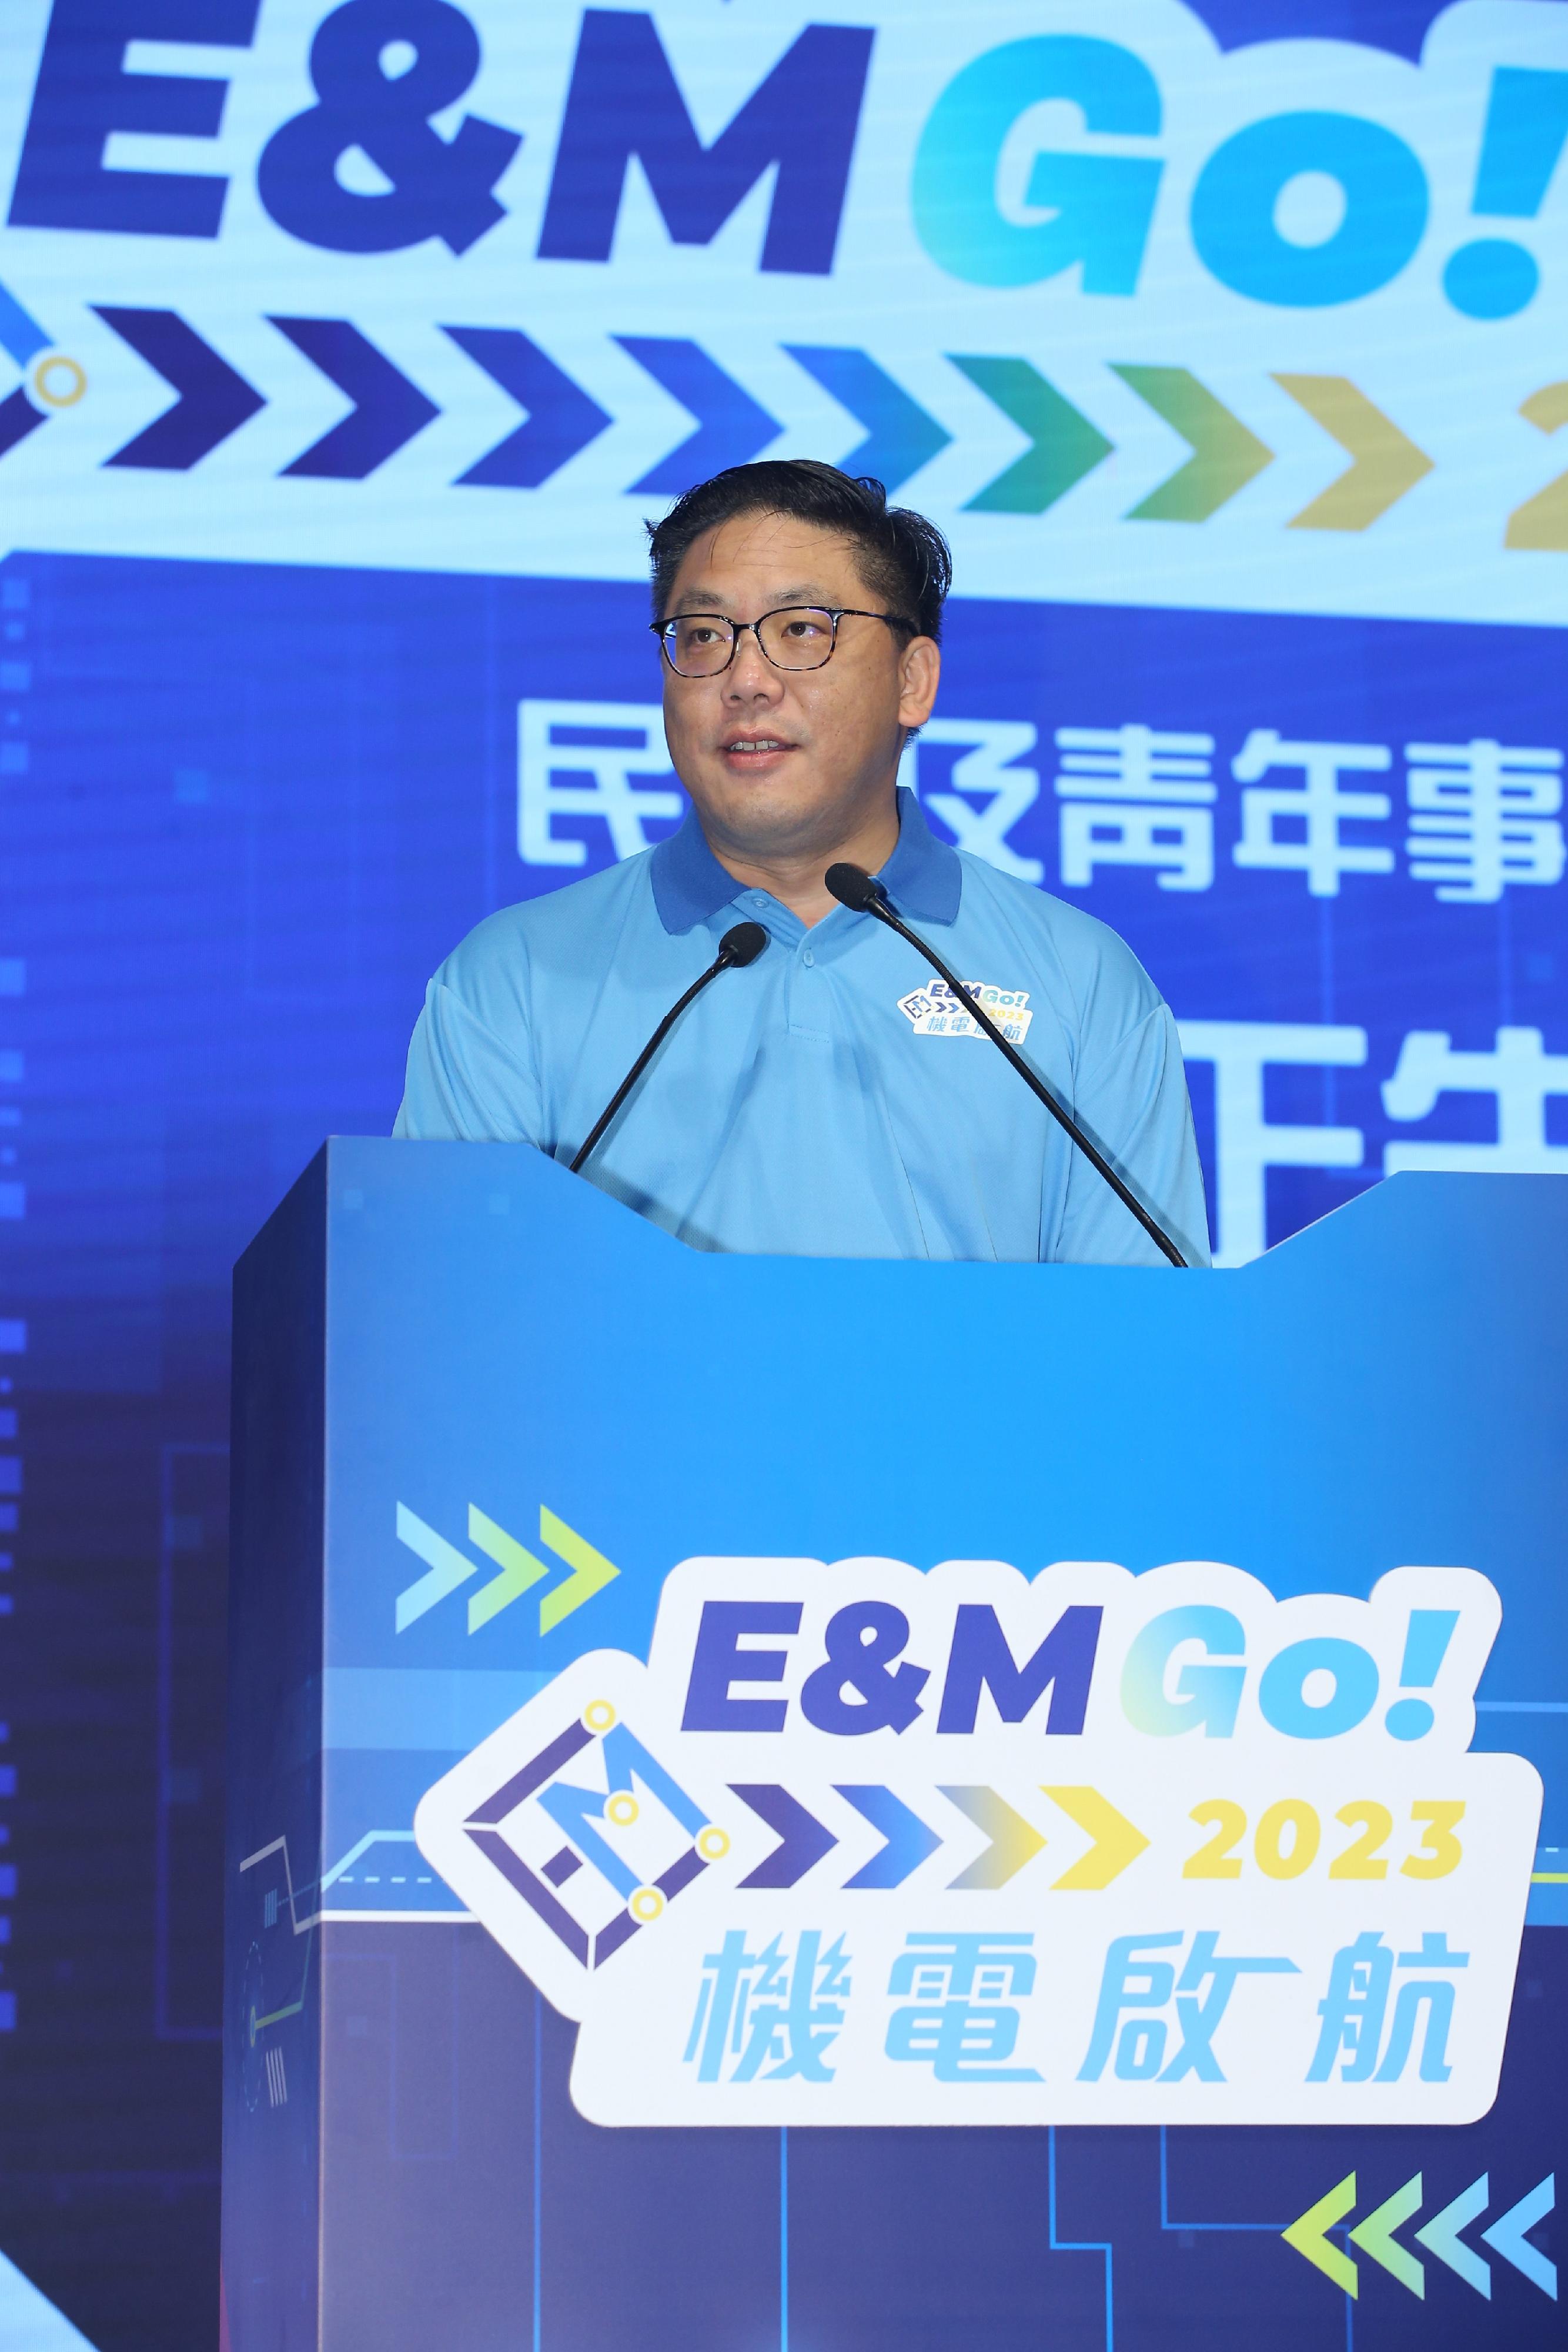 The Hong Kong Electrical and Mechanical Trade Promotion Working Group today (September 26) held the "E&M GO!" orientation ceremony 2023. Photo shows the Under Secretary for Home and Youth Affairs, Mr Clarence Leung, speaking at the ceremony.
 
